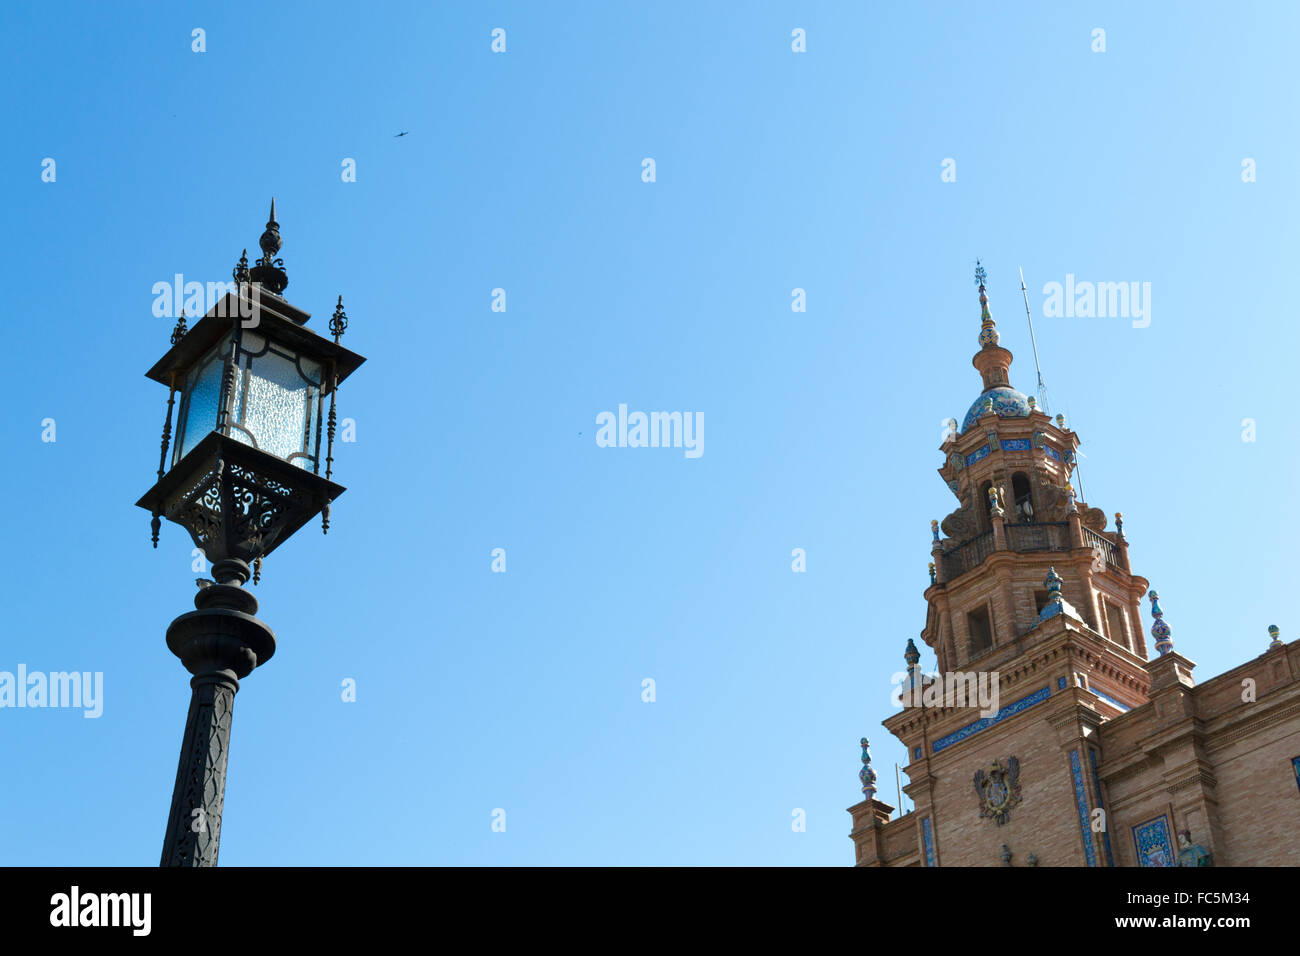 Lampost and tower at Spain square Stock Photo